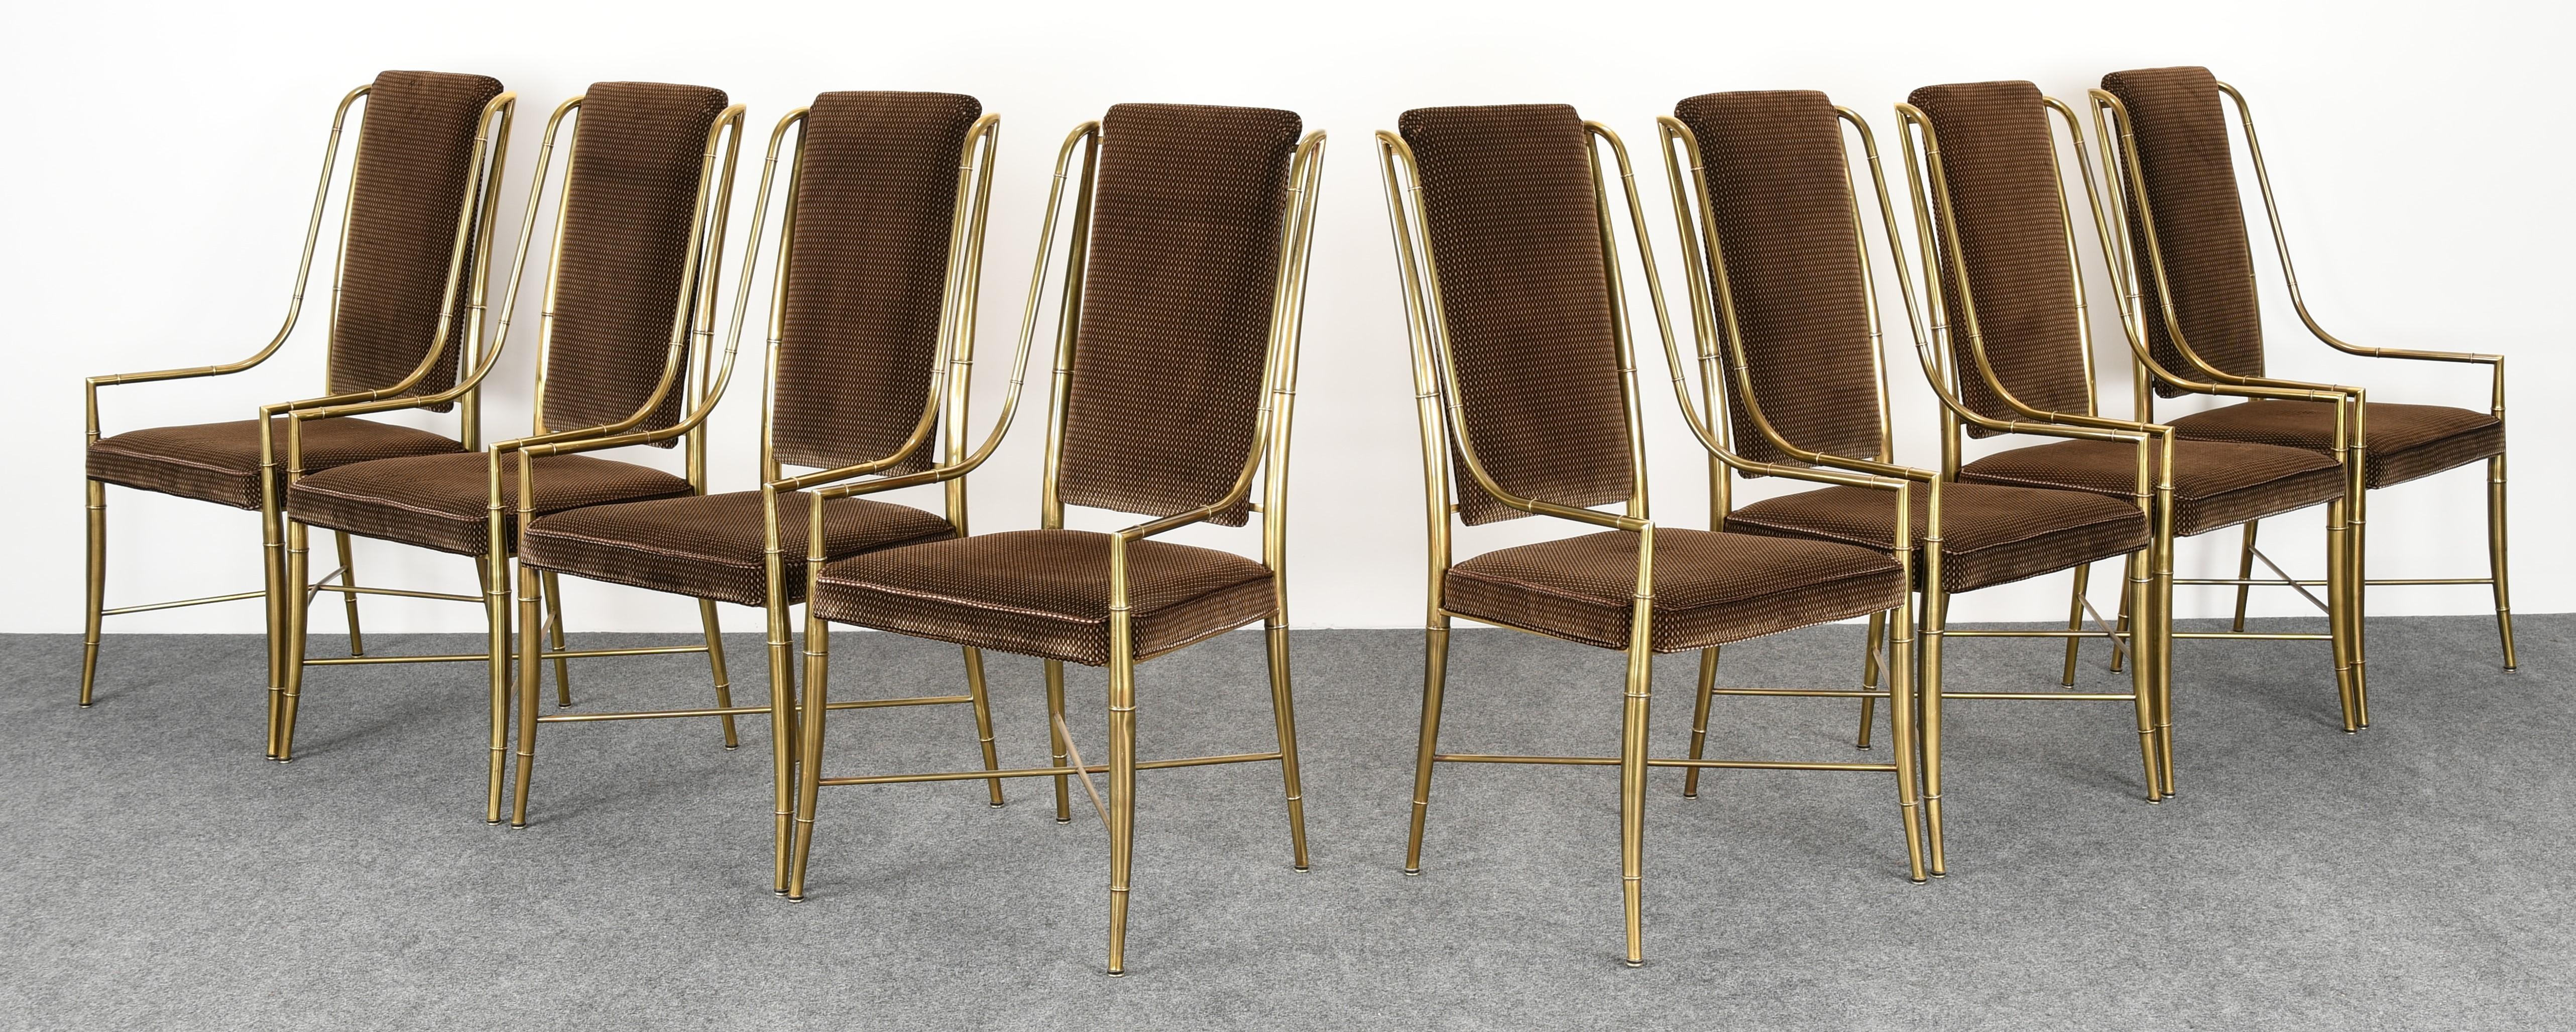 A magnificent set of eight chairs known as 